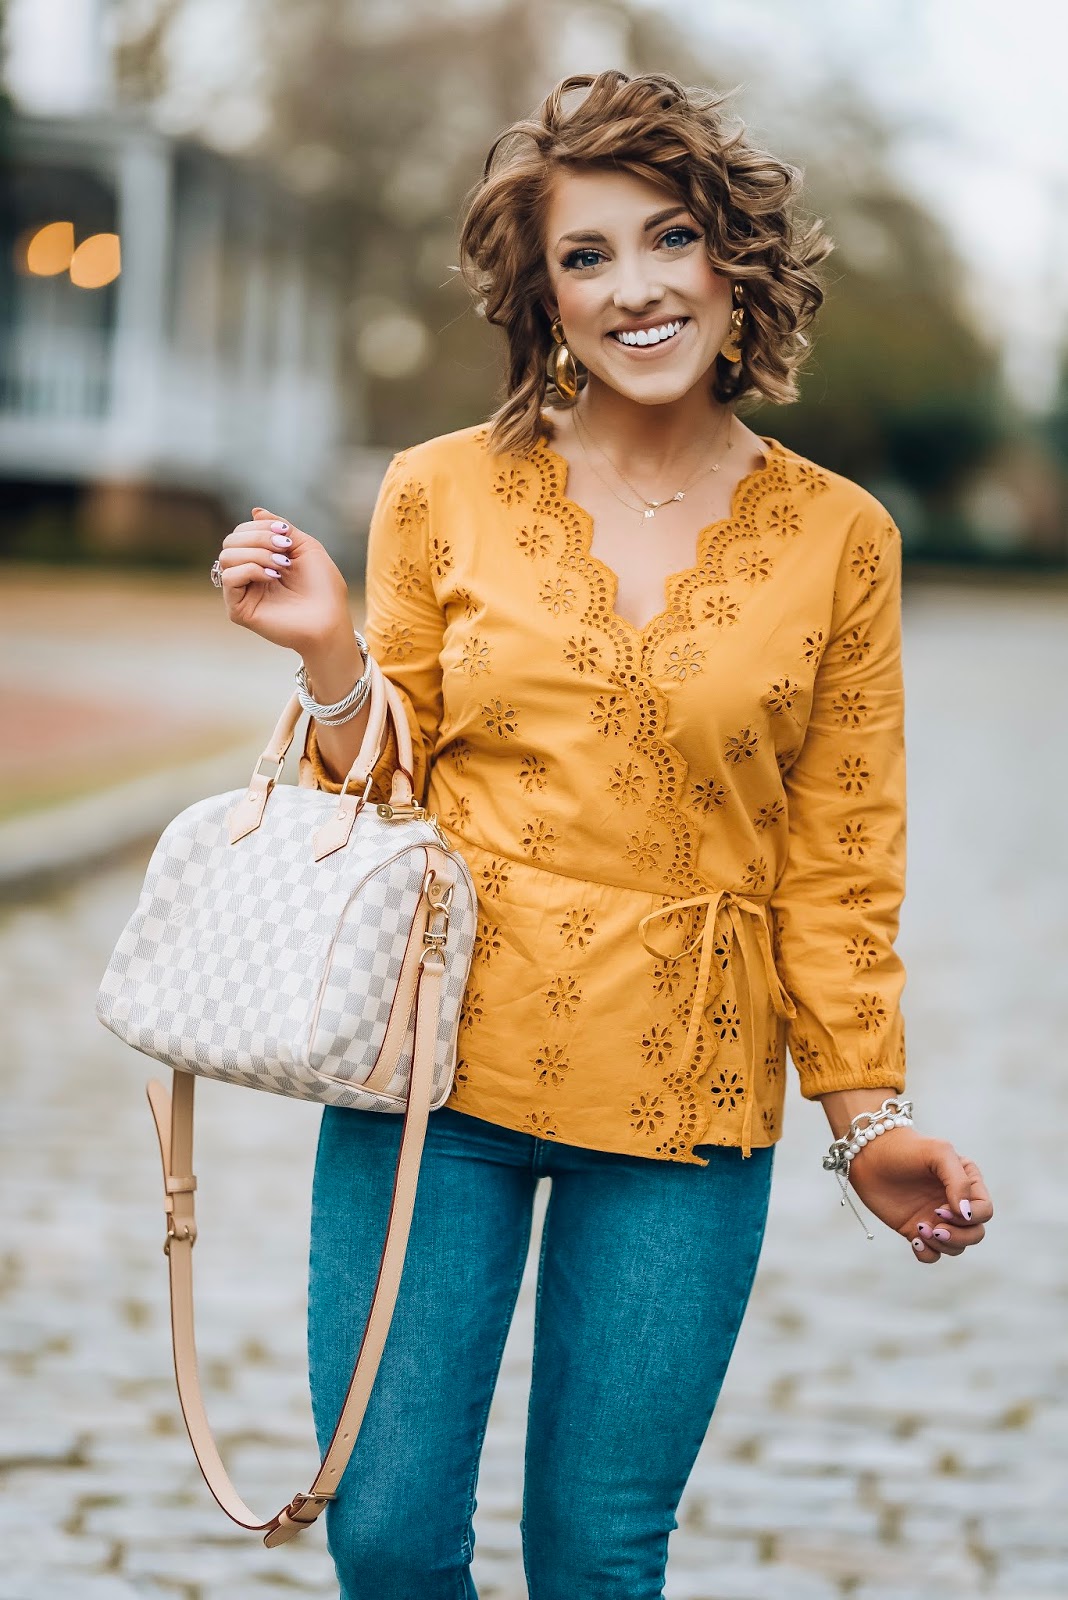 Yellow Scallop Eyelet Wrap Top for Spring + My New Favorite Jeans  - Something Delightful Blog